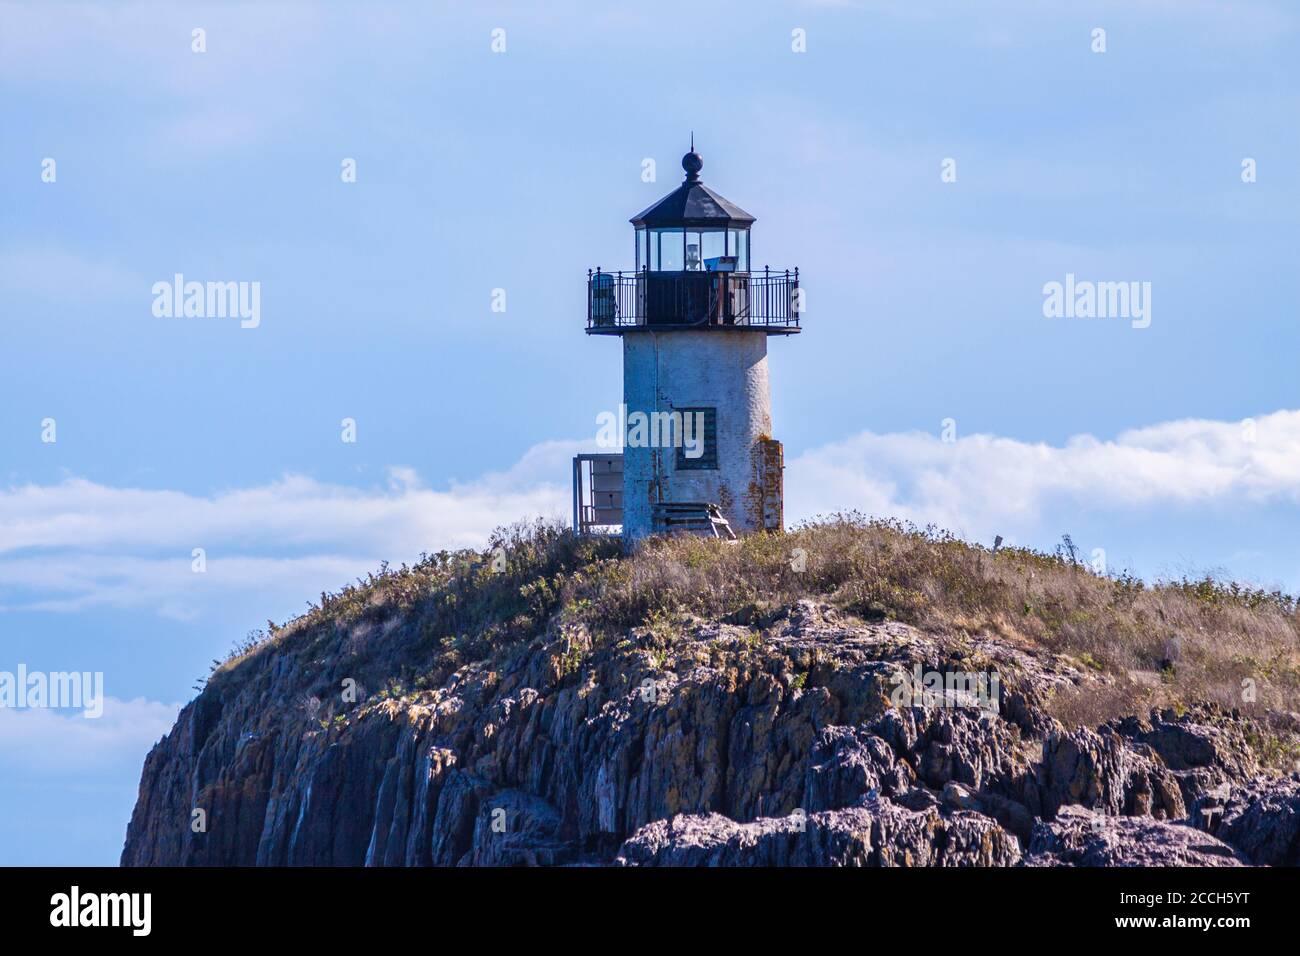 Pond Island Lighthouse, located on Pond Island at the mouth of the  Kennebec River in Maine, was established in 1821 and replaced in 1855. Stock Photo